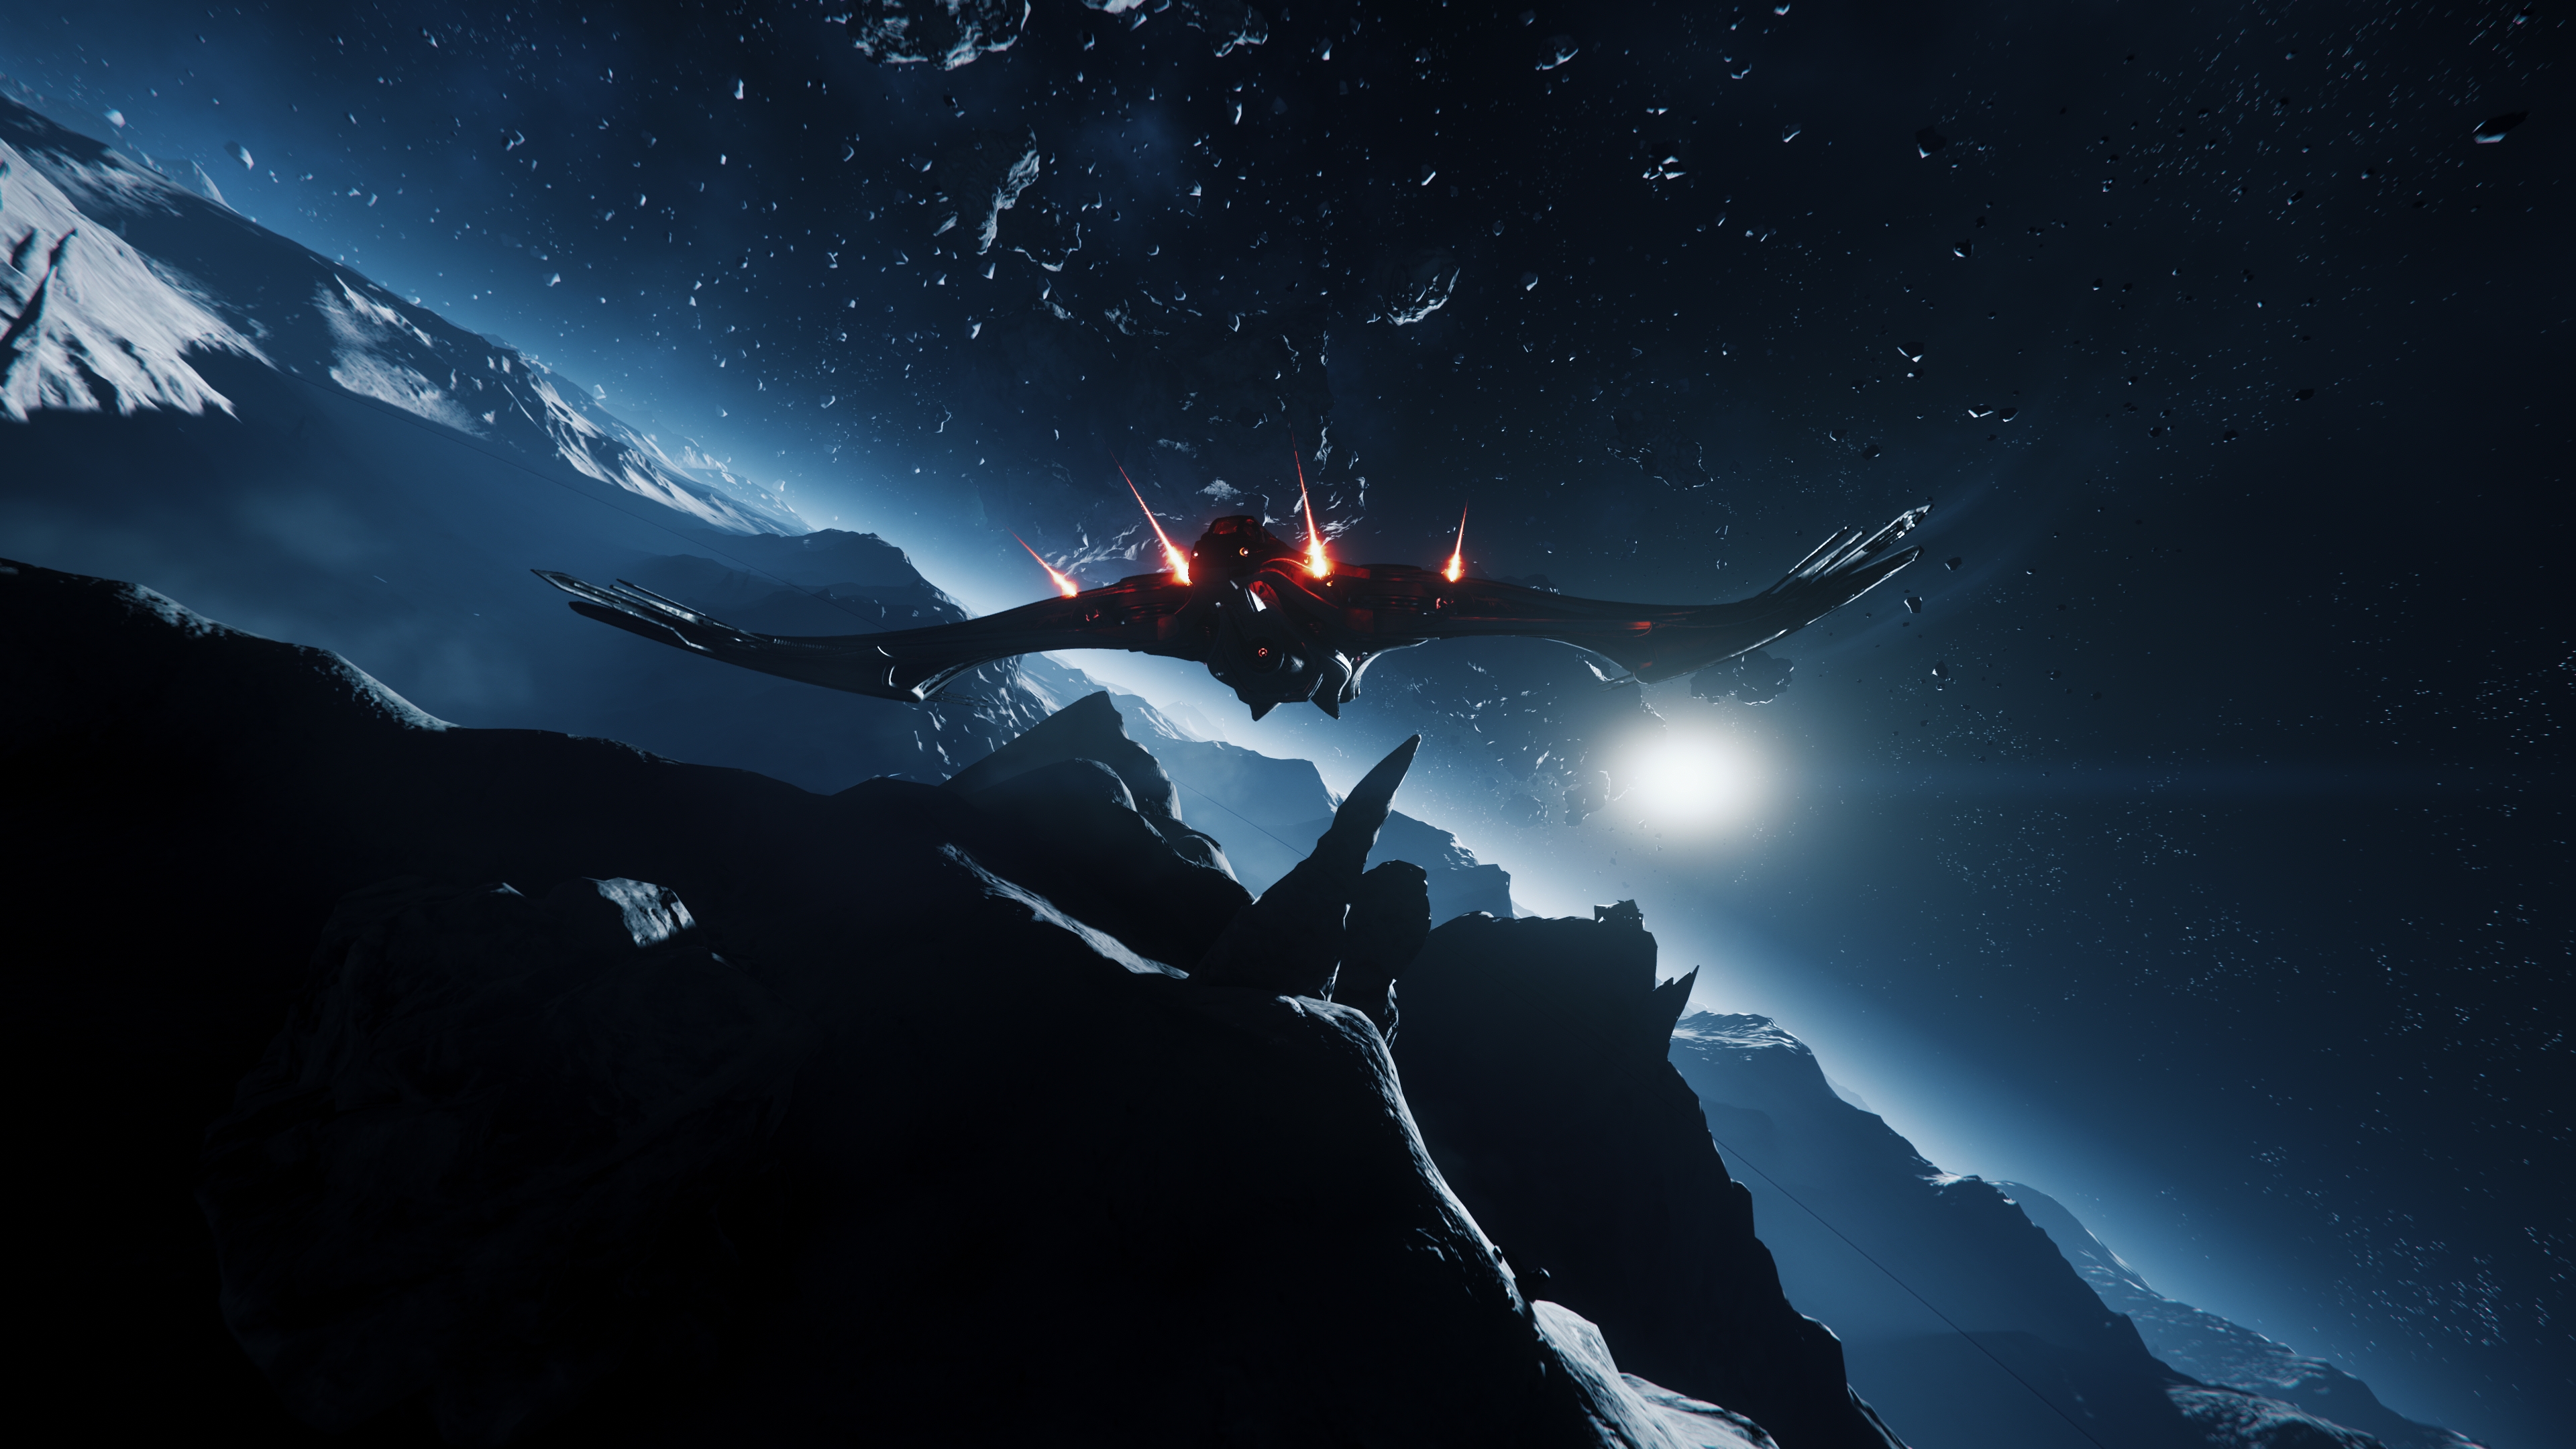 Blade (Star Citizen) wallpapers for desktop, download free Blade (Star  Citizen) pictures and backgrounds for PC 